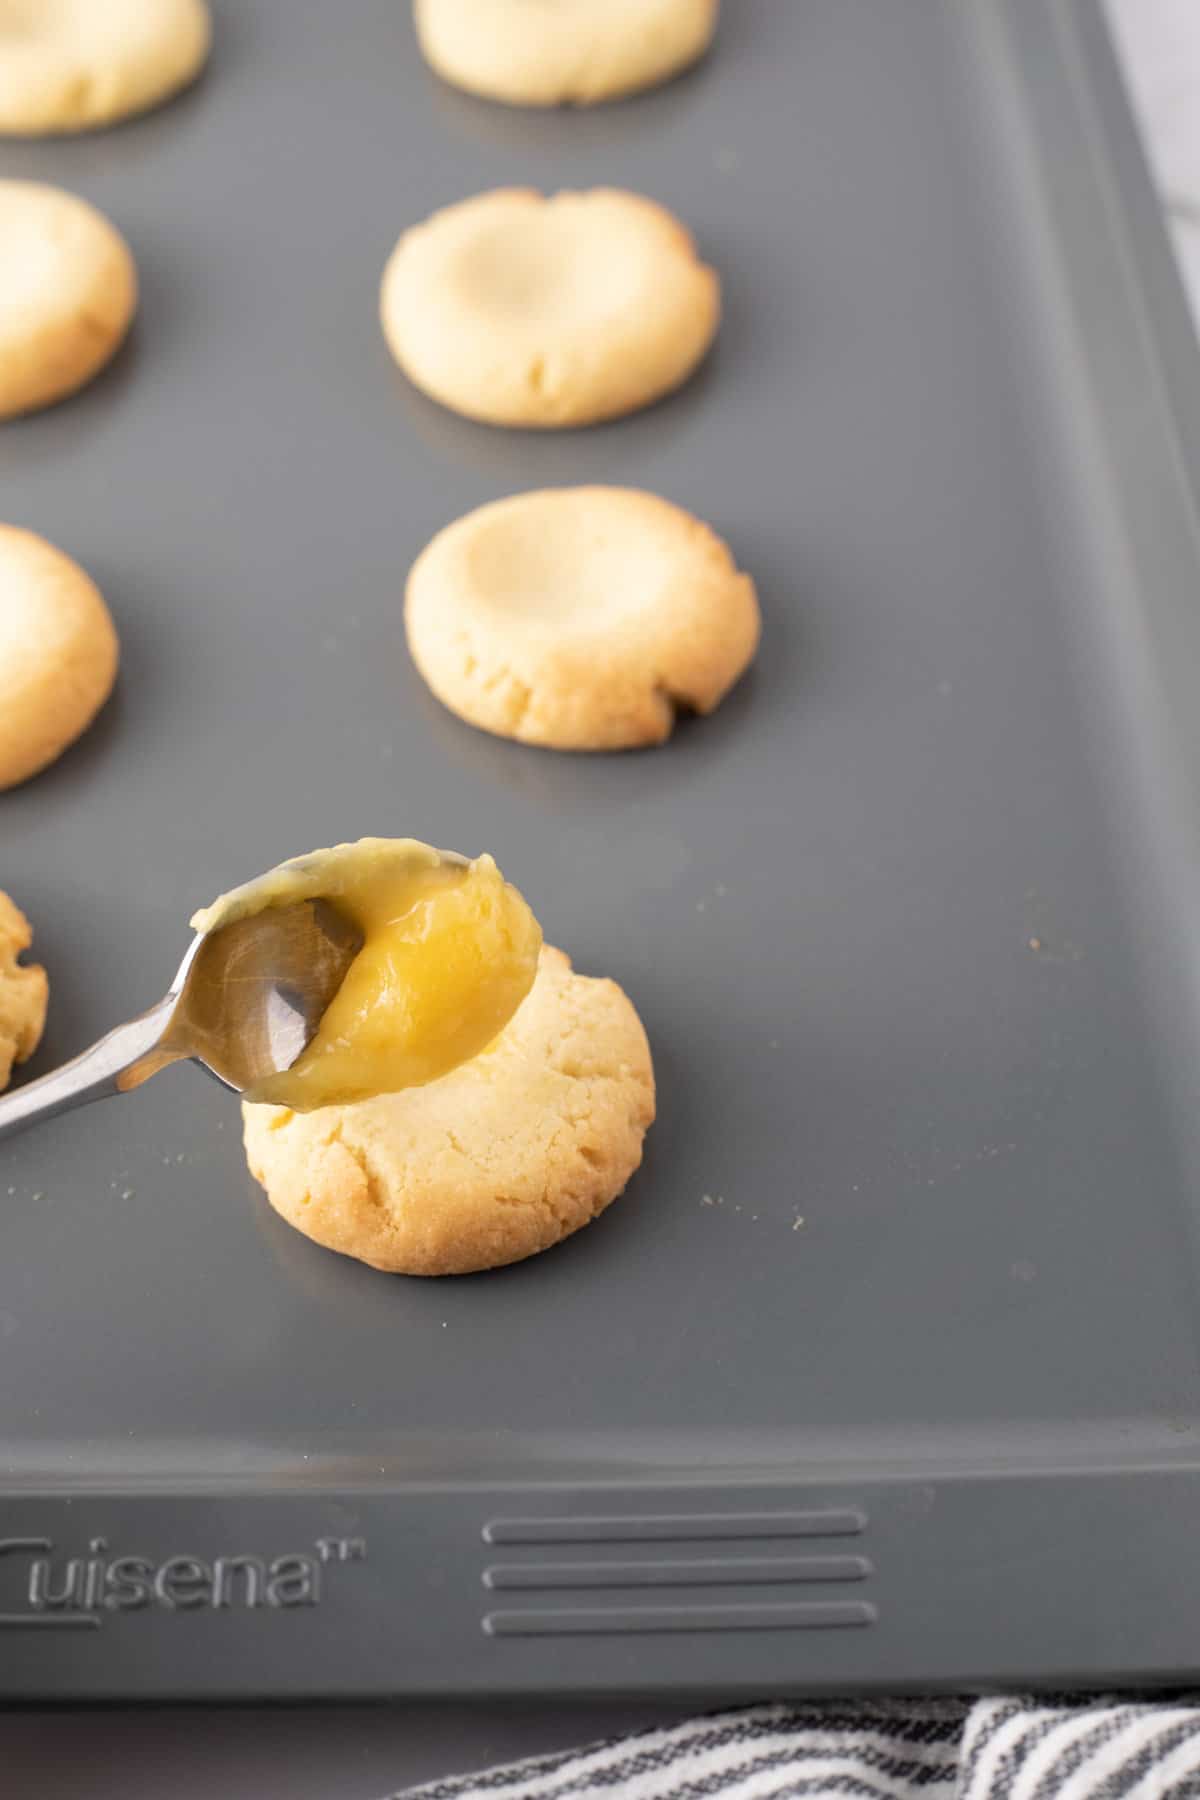 Side angle view showing spoon of lemon curd being added to cookies after being baked.